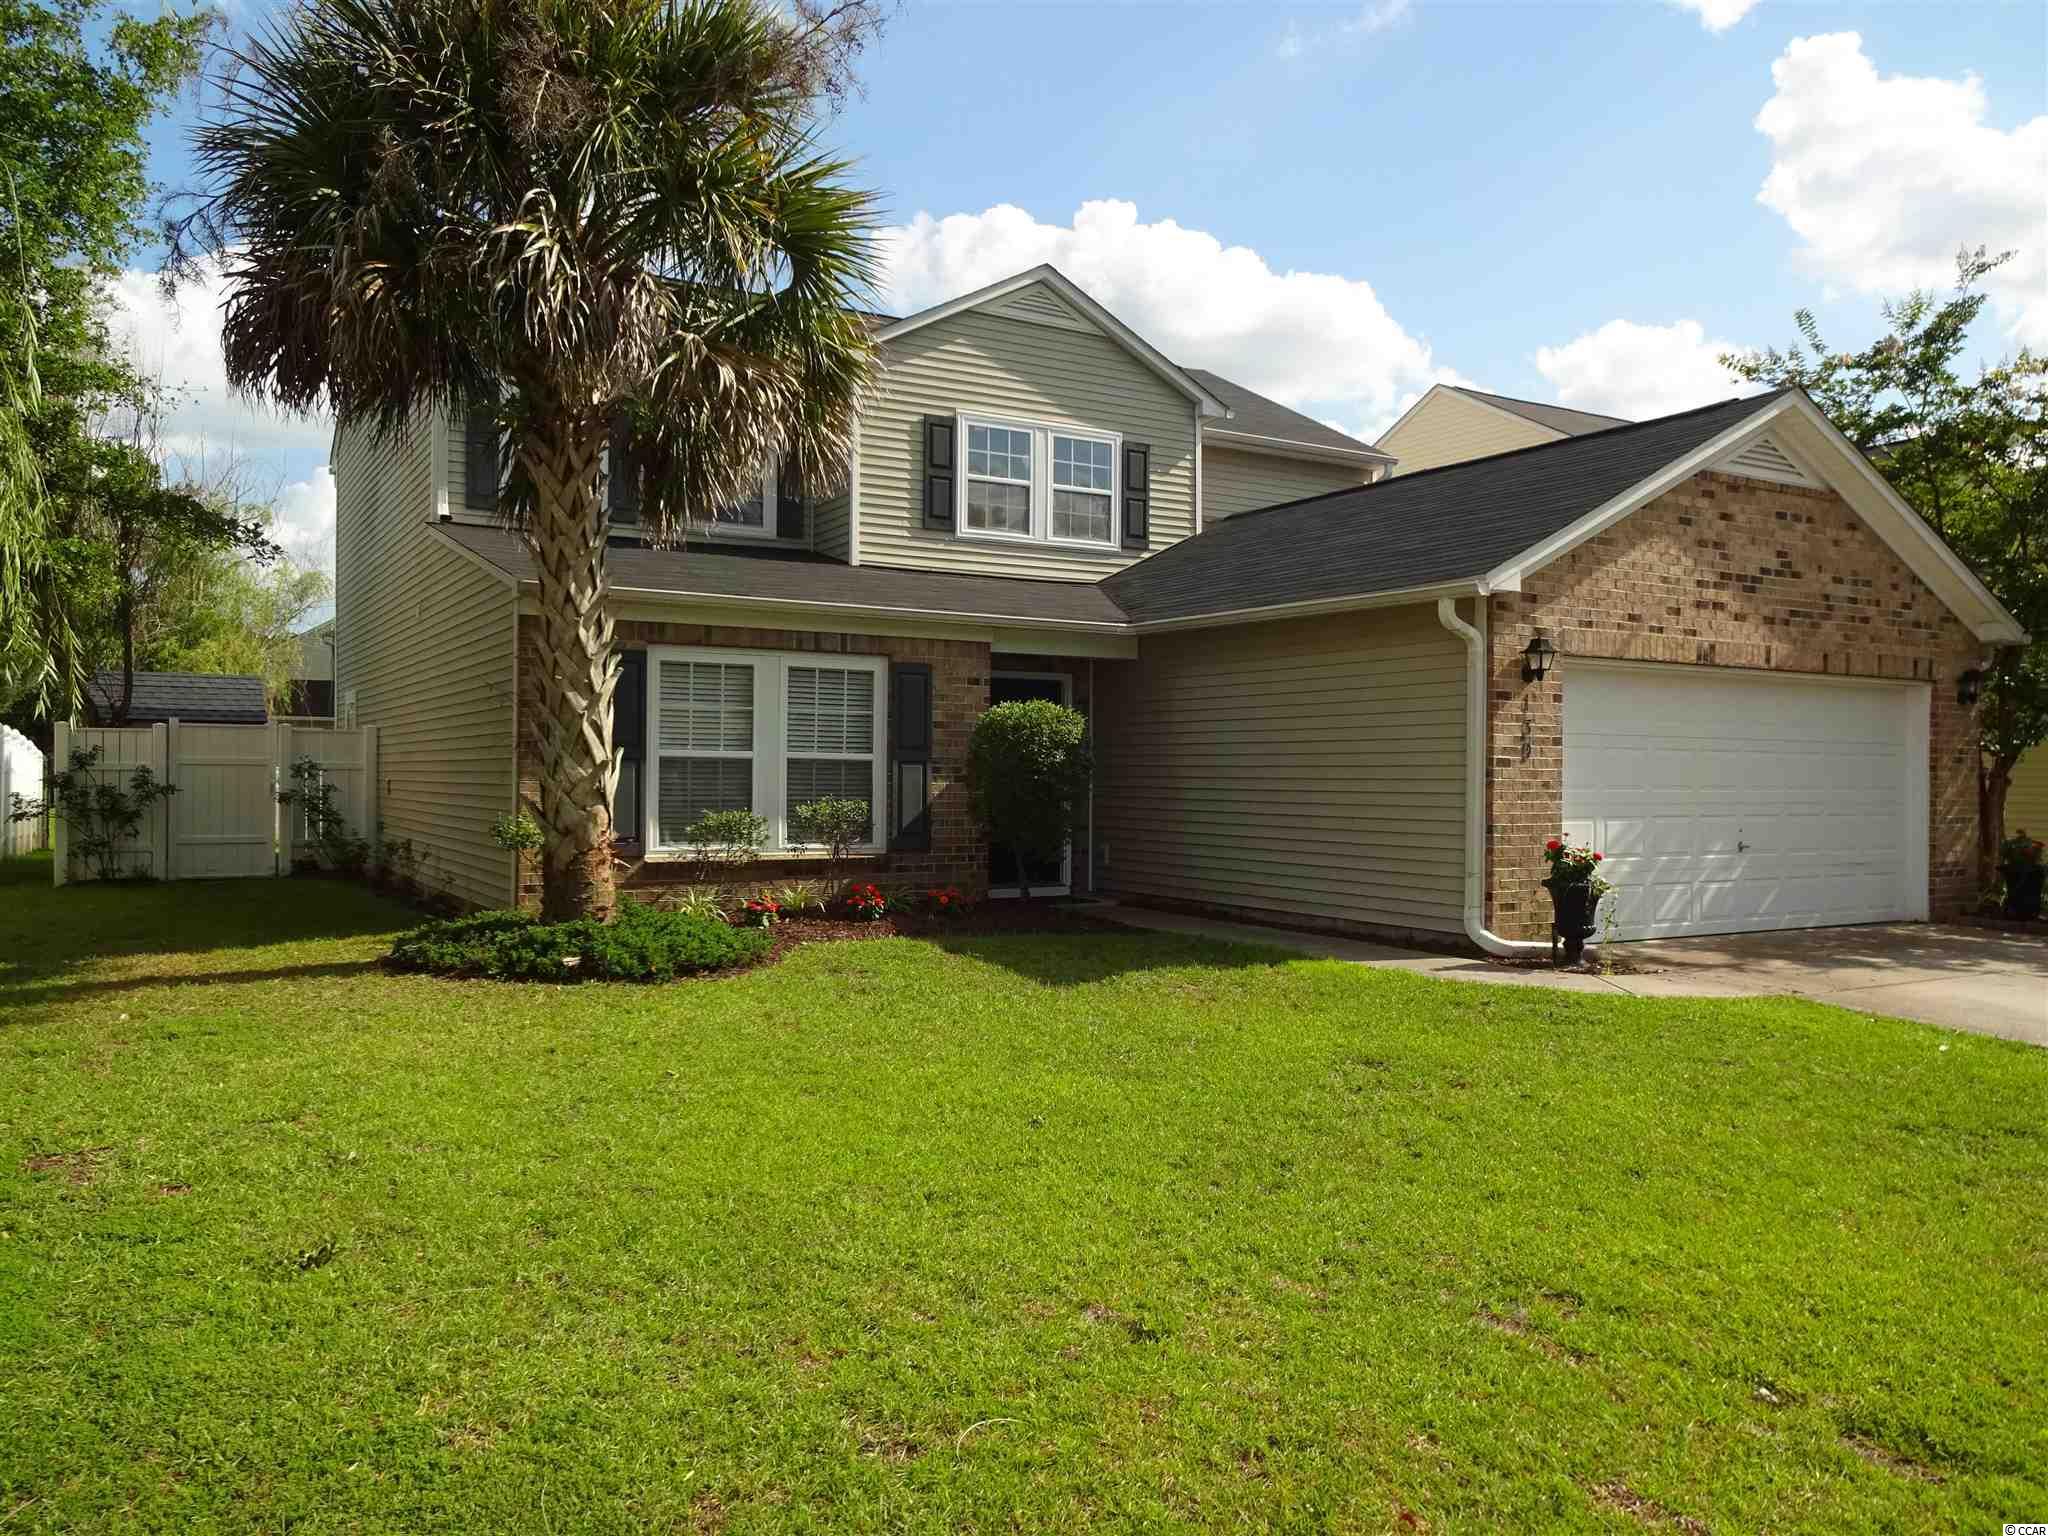 139 Weeping Willow Dr. Myrtle Beach, SC 29579